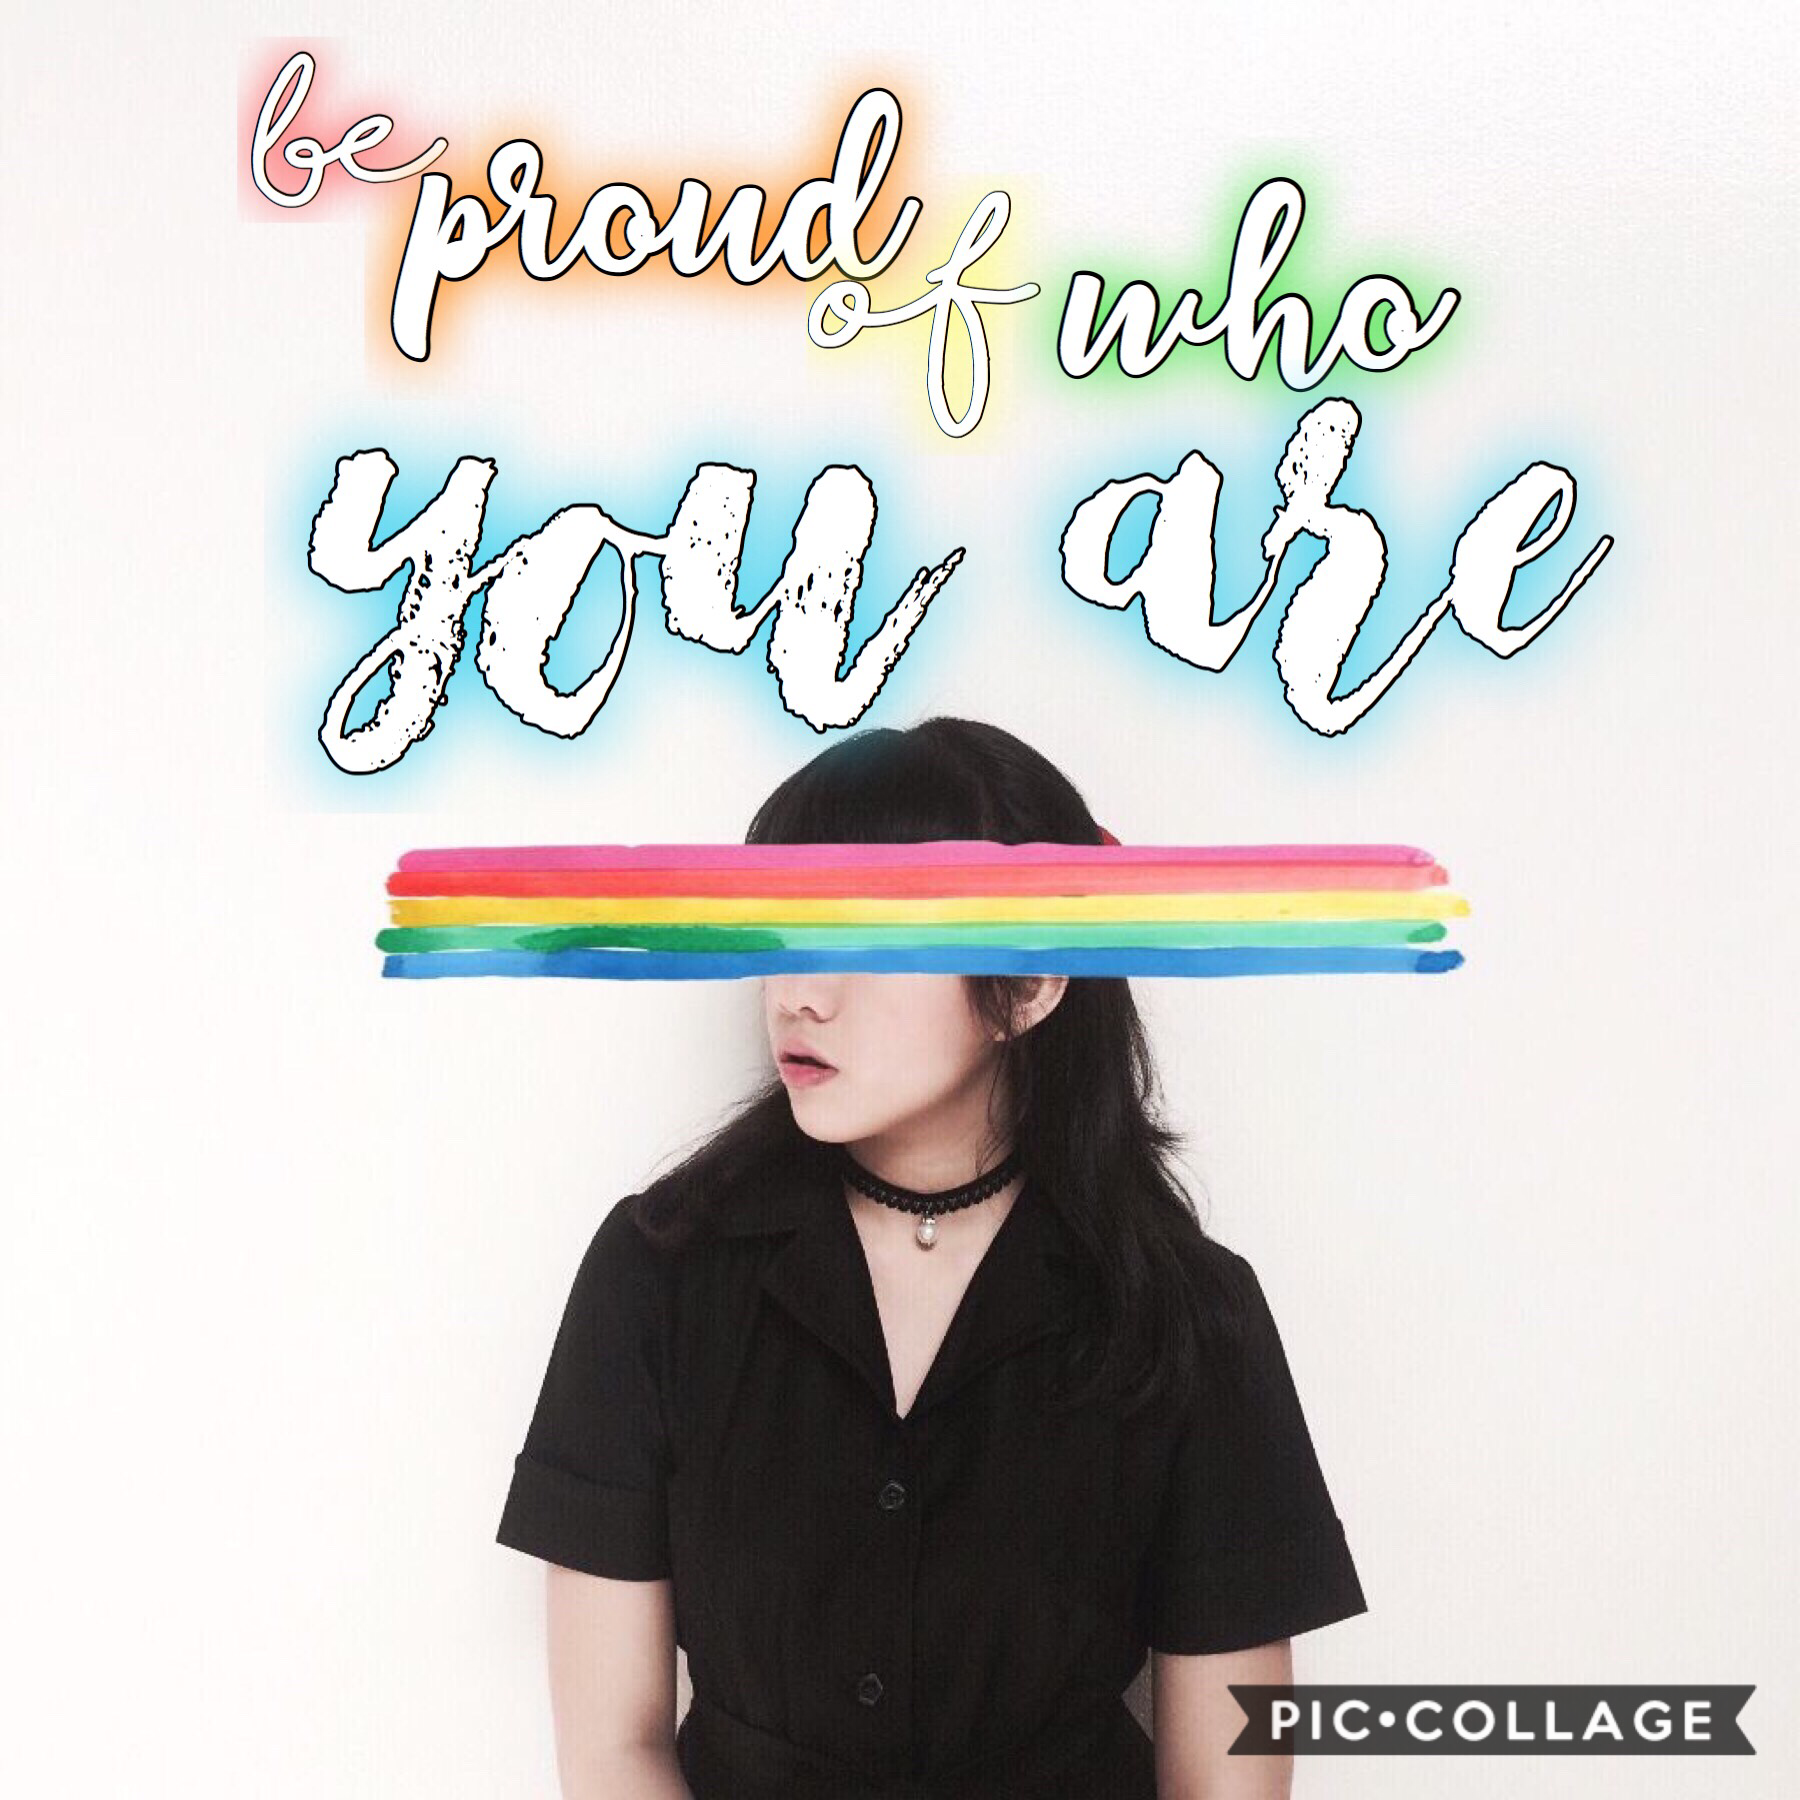 HAPPY🏳️‍🌈PRIDE🏳️‍🌈MONTH
I have many friends that are part of this community, and I support them with all of my heart ❤️